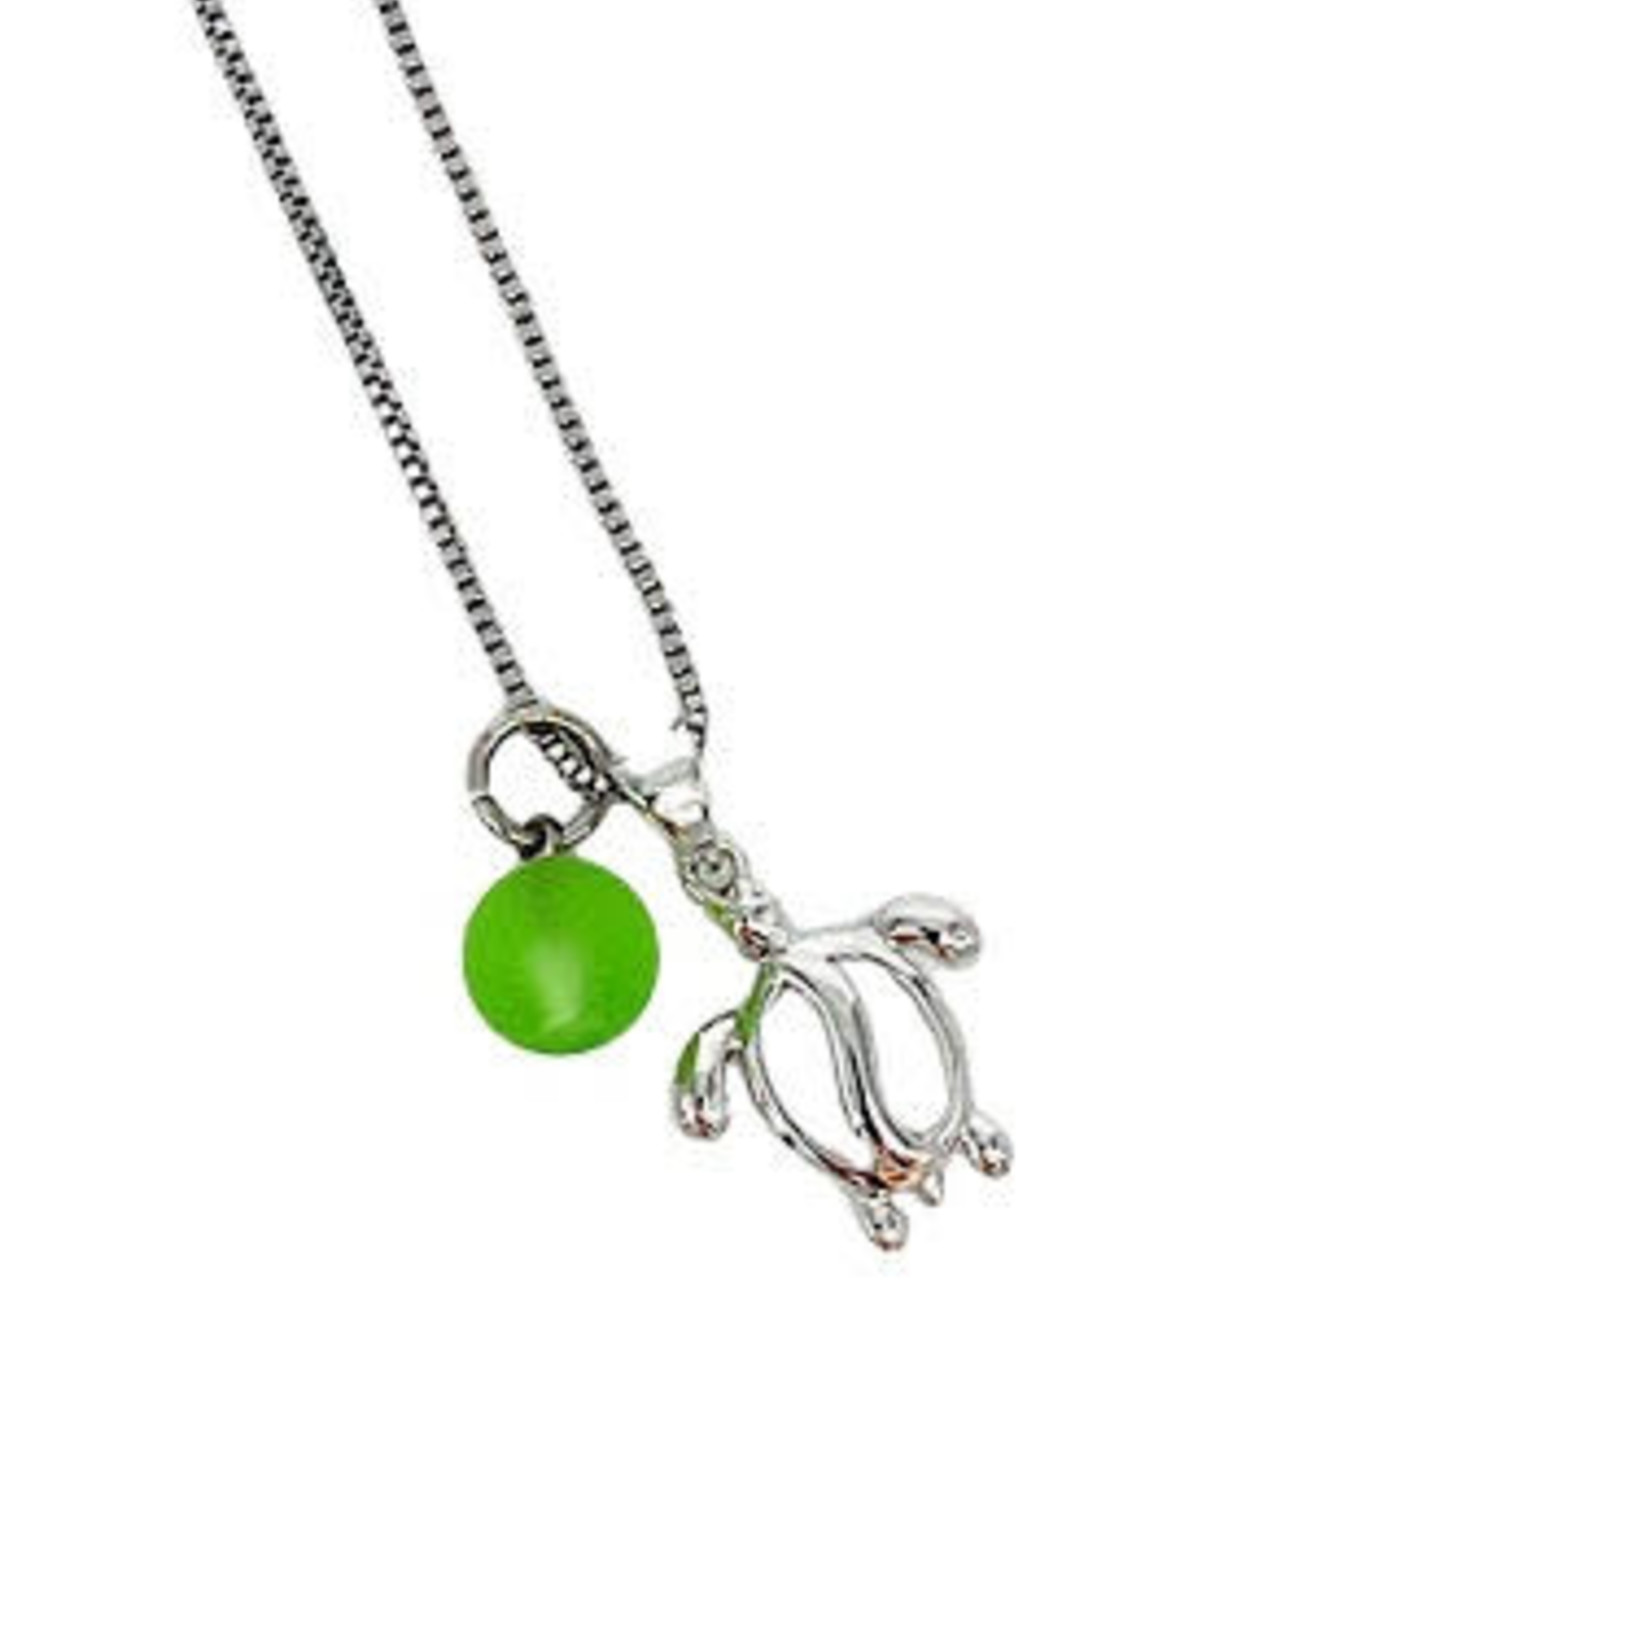 Stainless Steel Necklace with Charm and Glass Bead Turtle